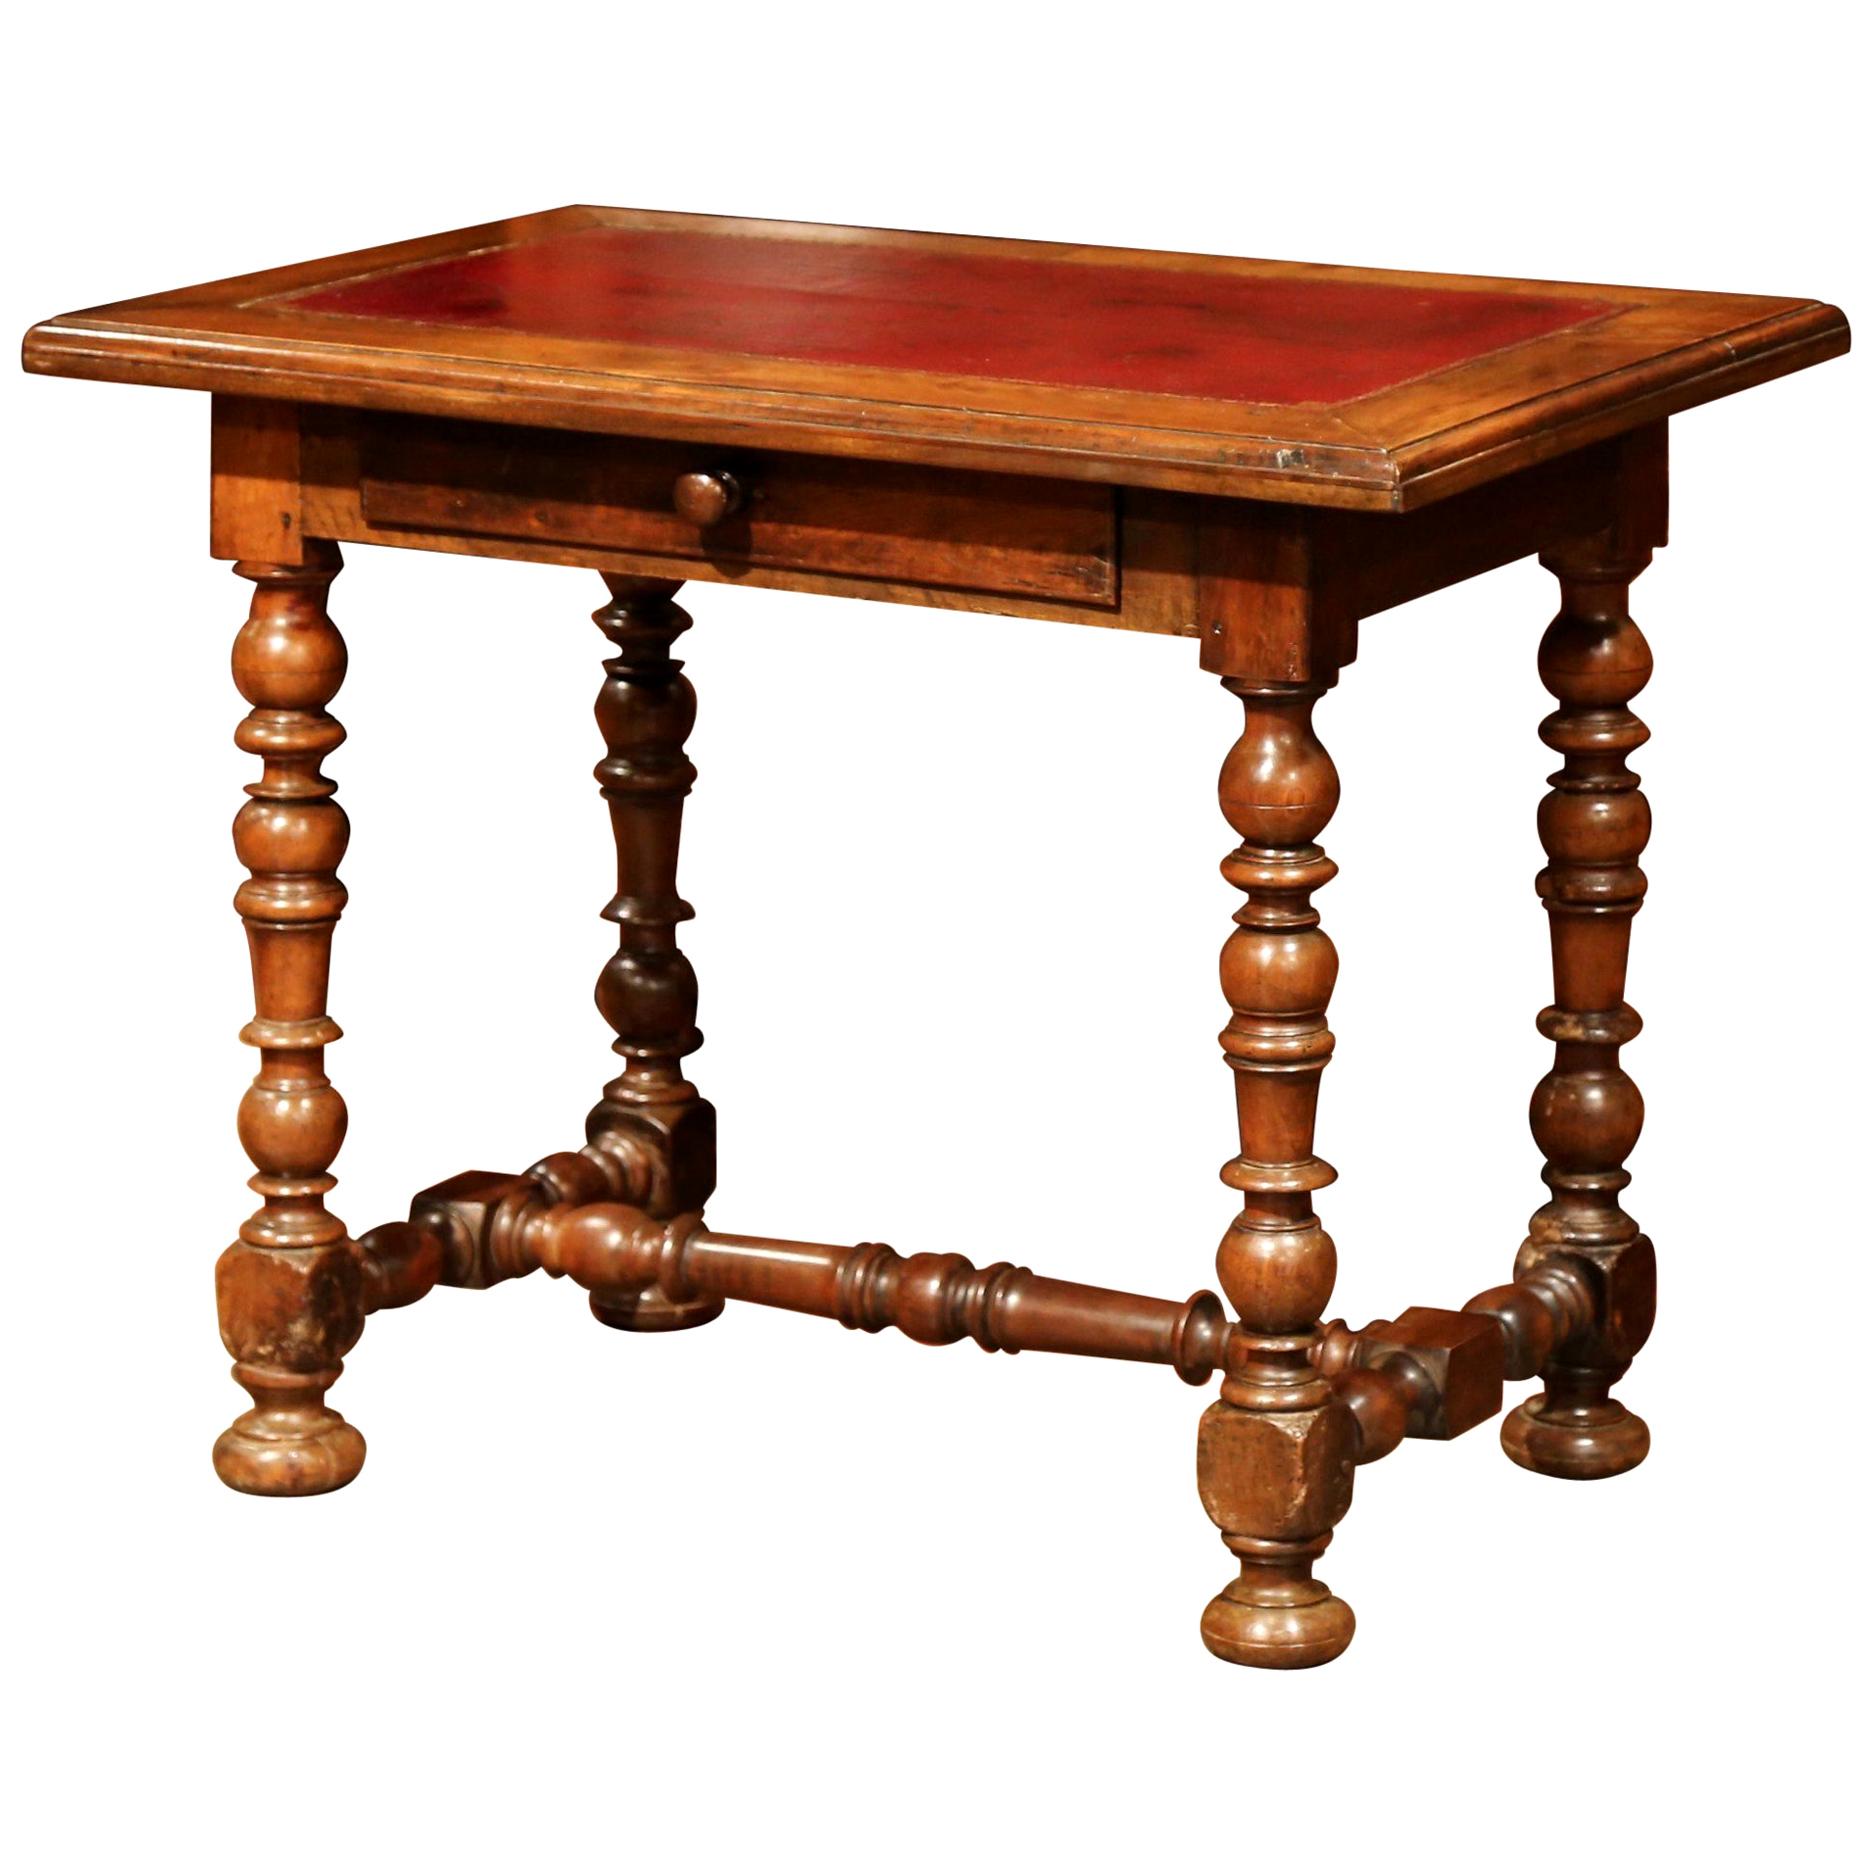 19th Century French Louis XIII Carved Walnut Table Desk with Red Leather Top